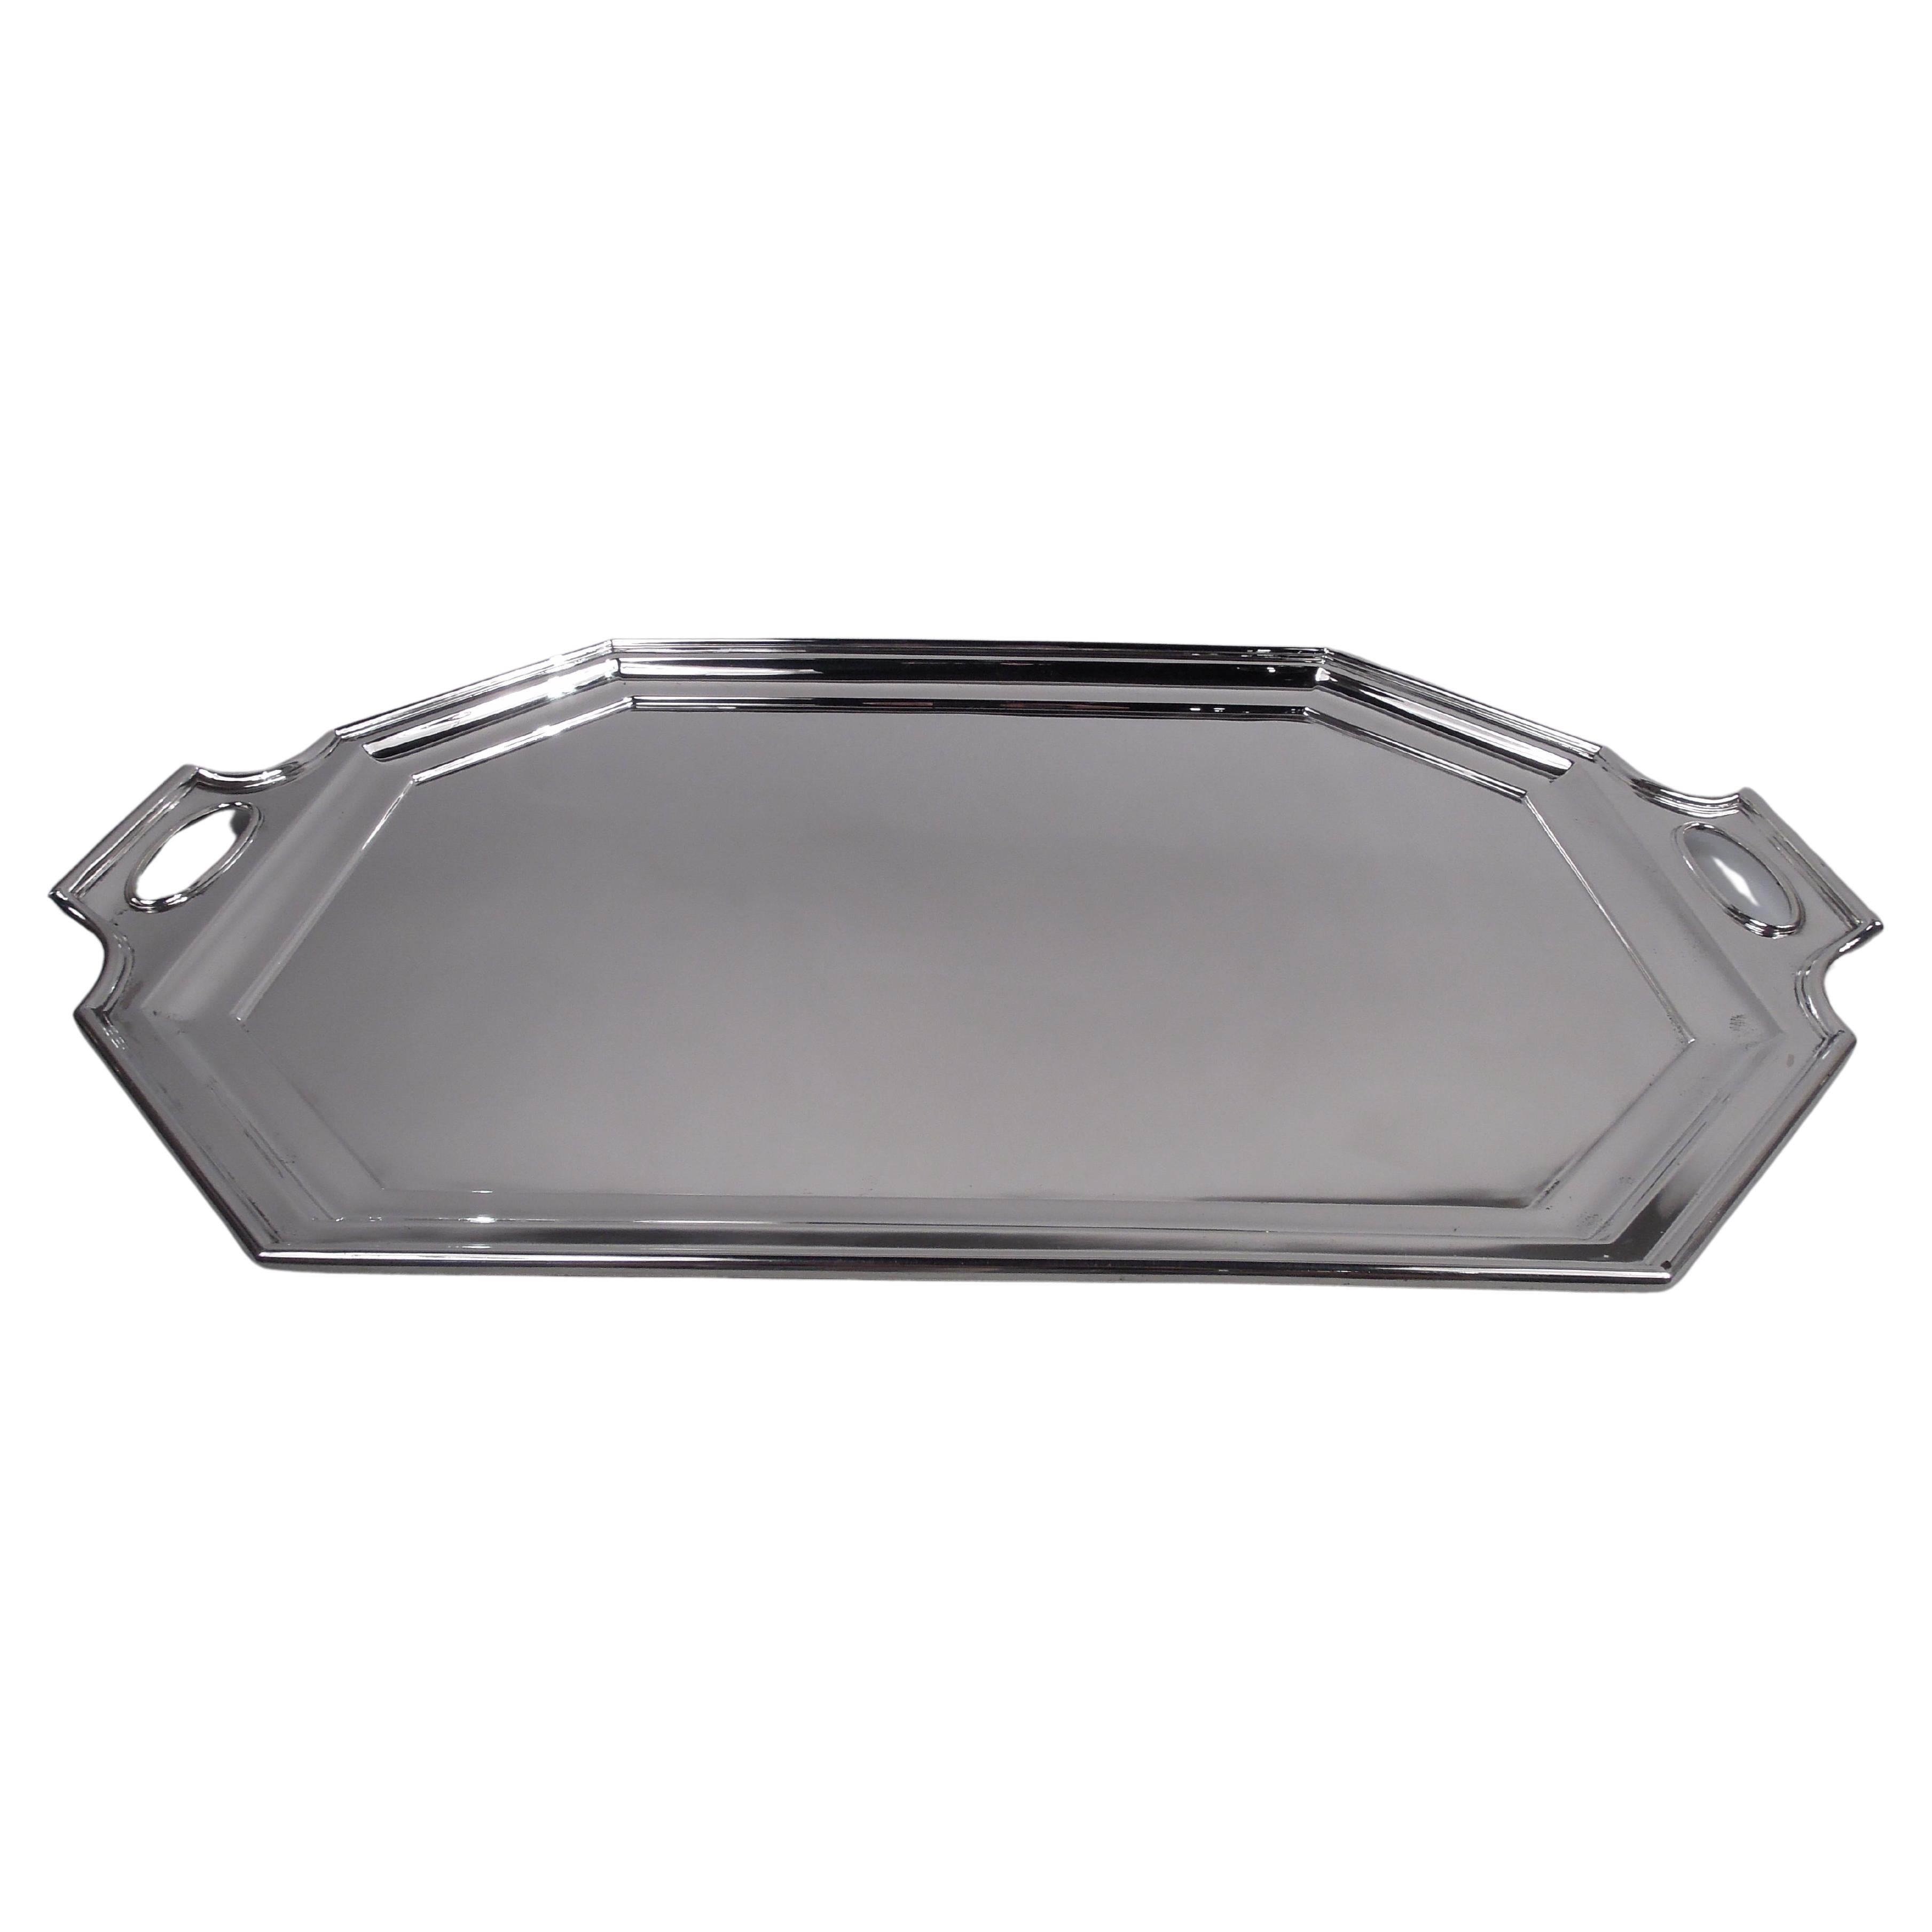 Antique American Art Deco Sterling Silver Tray in Fairfax Pattern For Sale